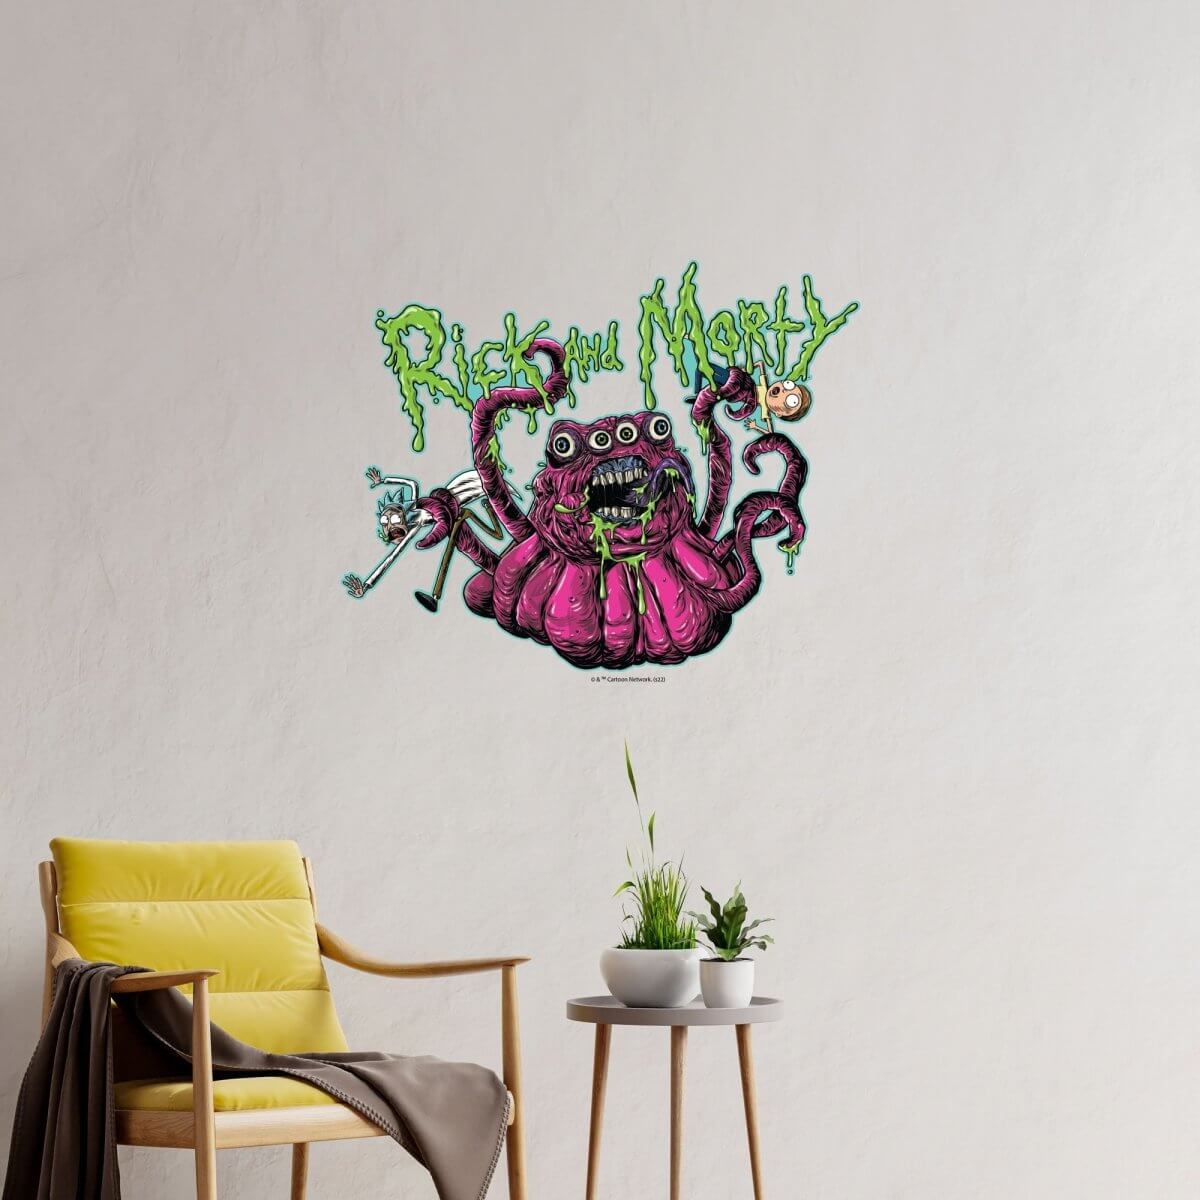 Kismet Decals Rick & Morty Psychedelic Monsters 7 Licensed Wall Sticker - Easy DIY Home & Kids Room Decor Wall Decal Art - Kismet Decals